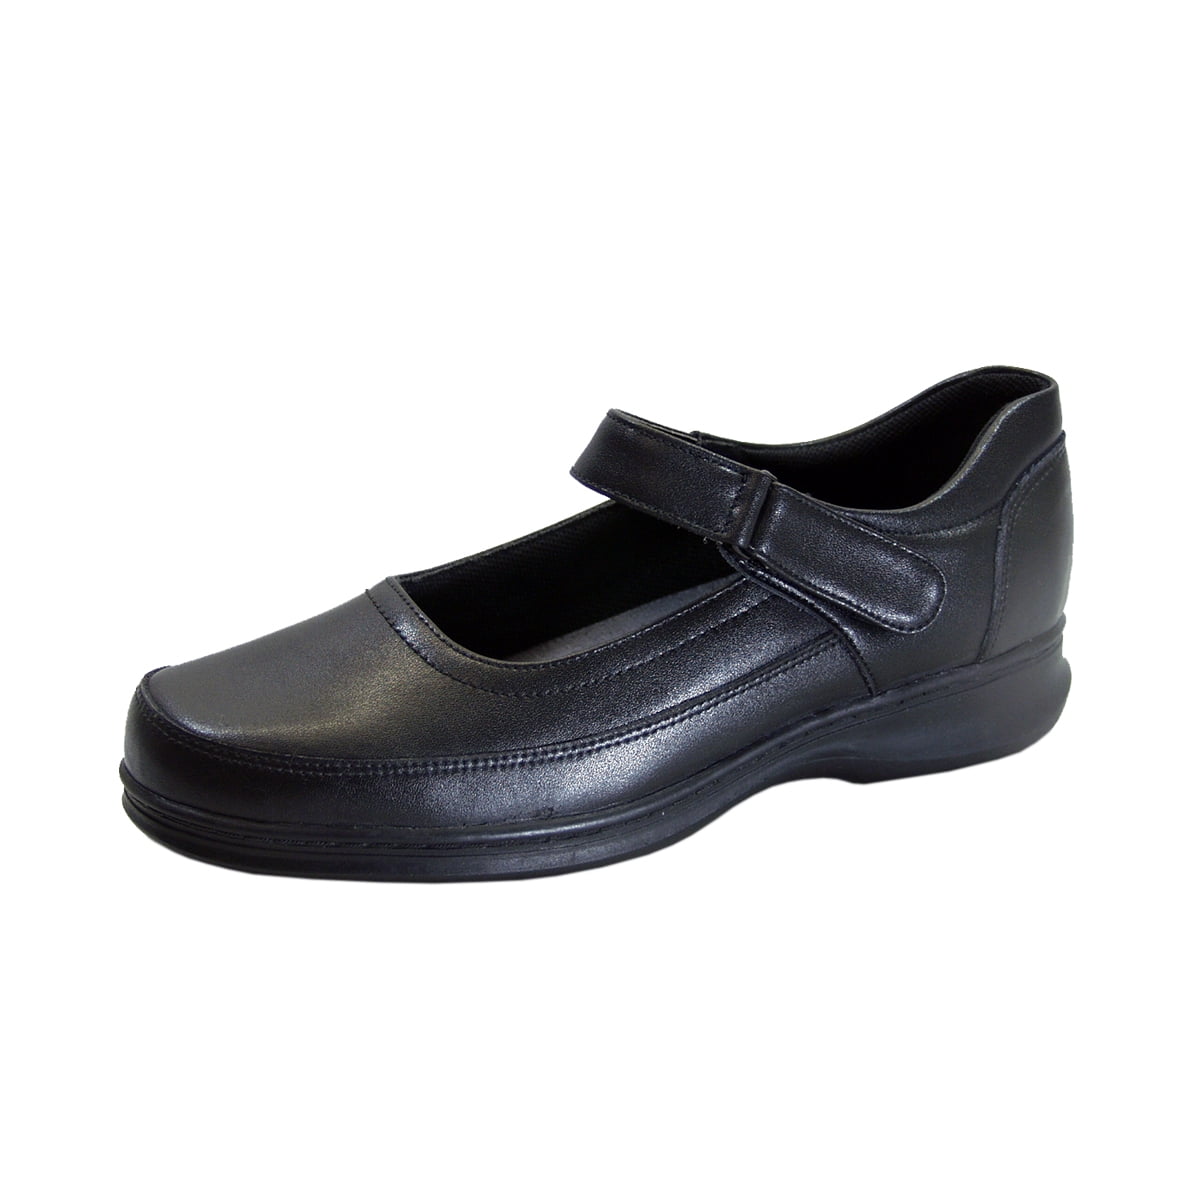 24 HOUR COMFORT Kimmy Women's Wide Width Leather Shoes BLACK 8.5 ...